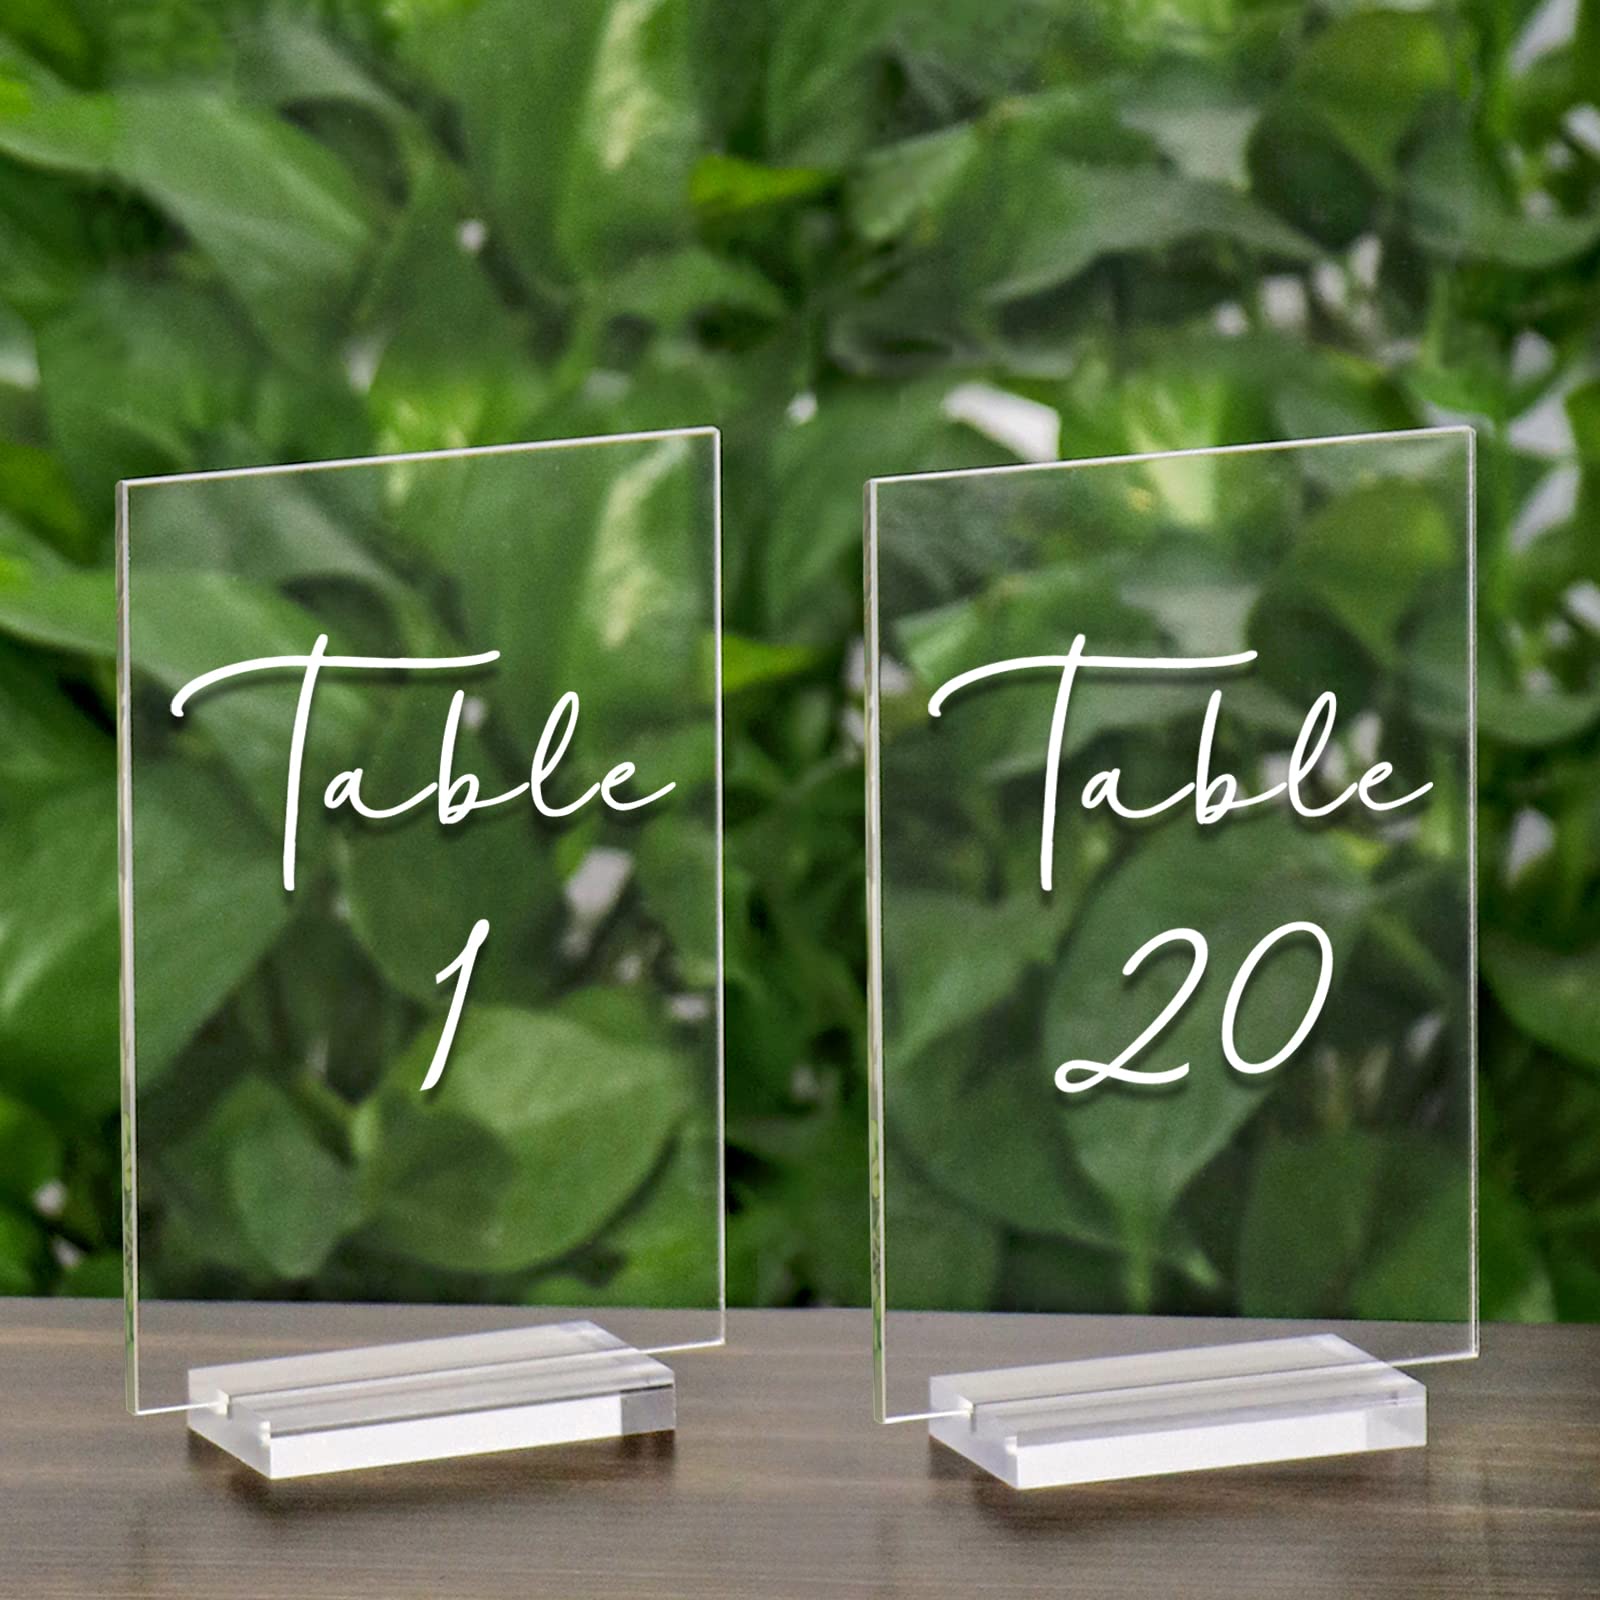 OurWarm 20 Pack Wedding Acrylic Table Numbers with Stands for Wedding Reception and Events - Blank, Clear, Elegant, and Personalized Banquet Table Number Holders for Table Centerpiece Decoration